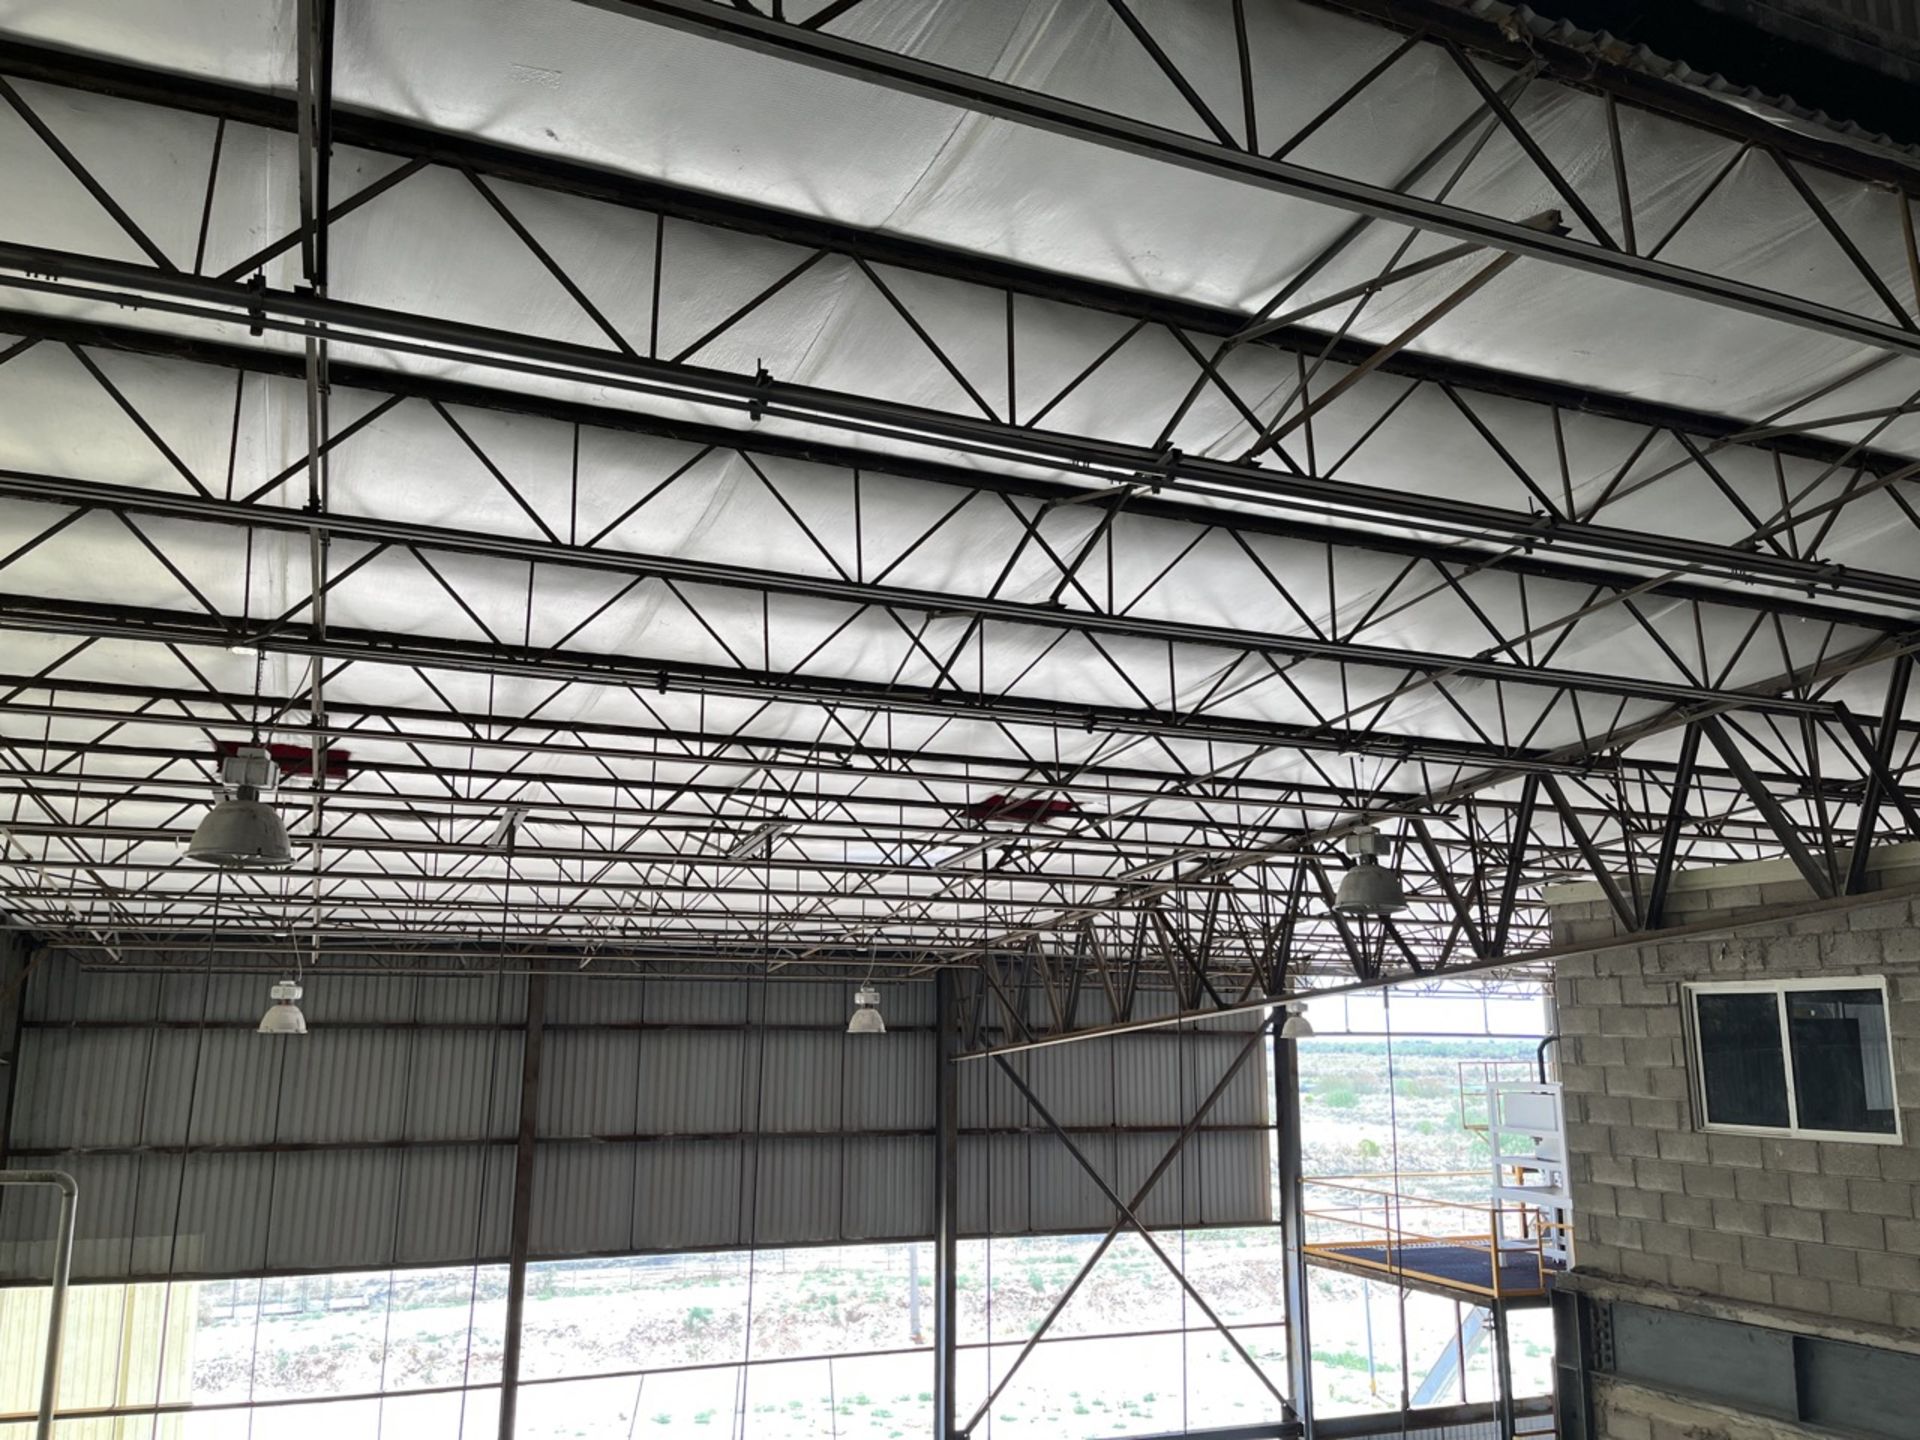 Complete Industrial Warehouse Structure - Image 123 of 141